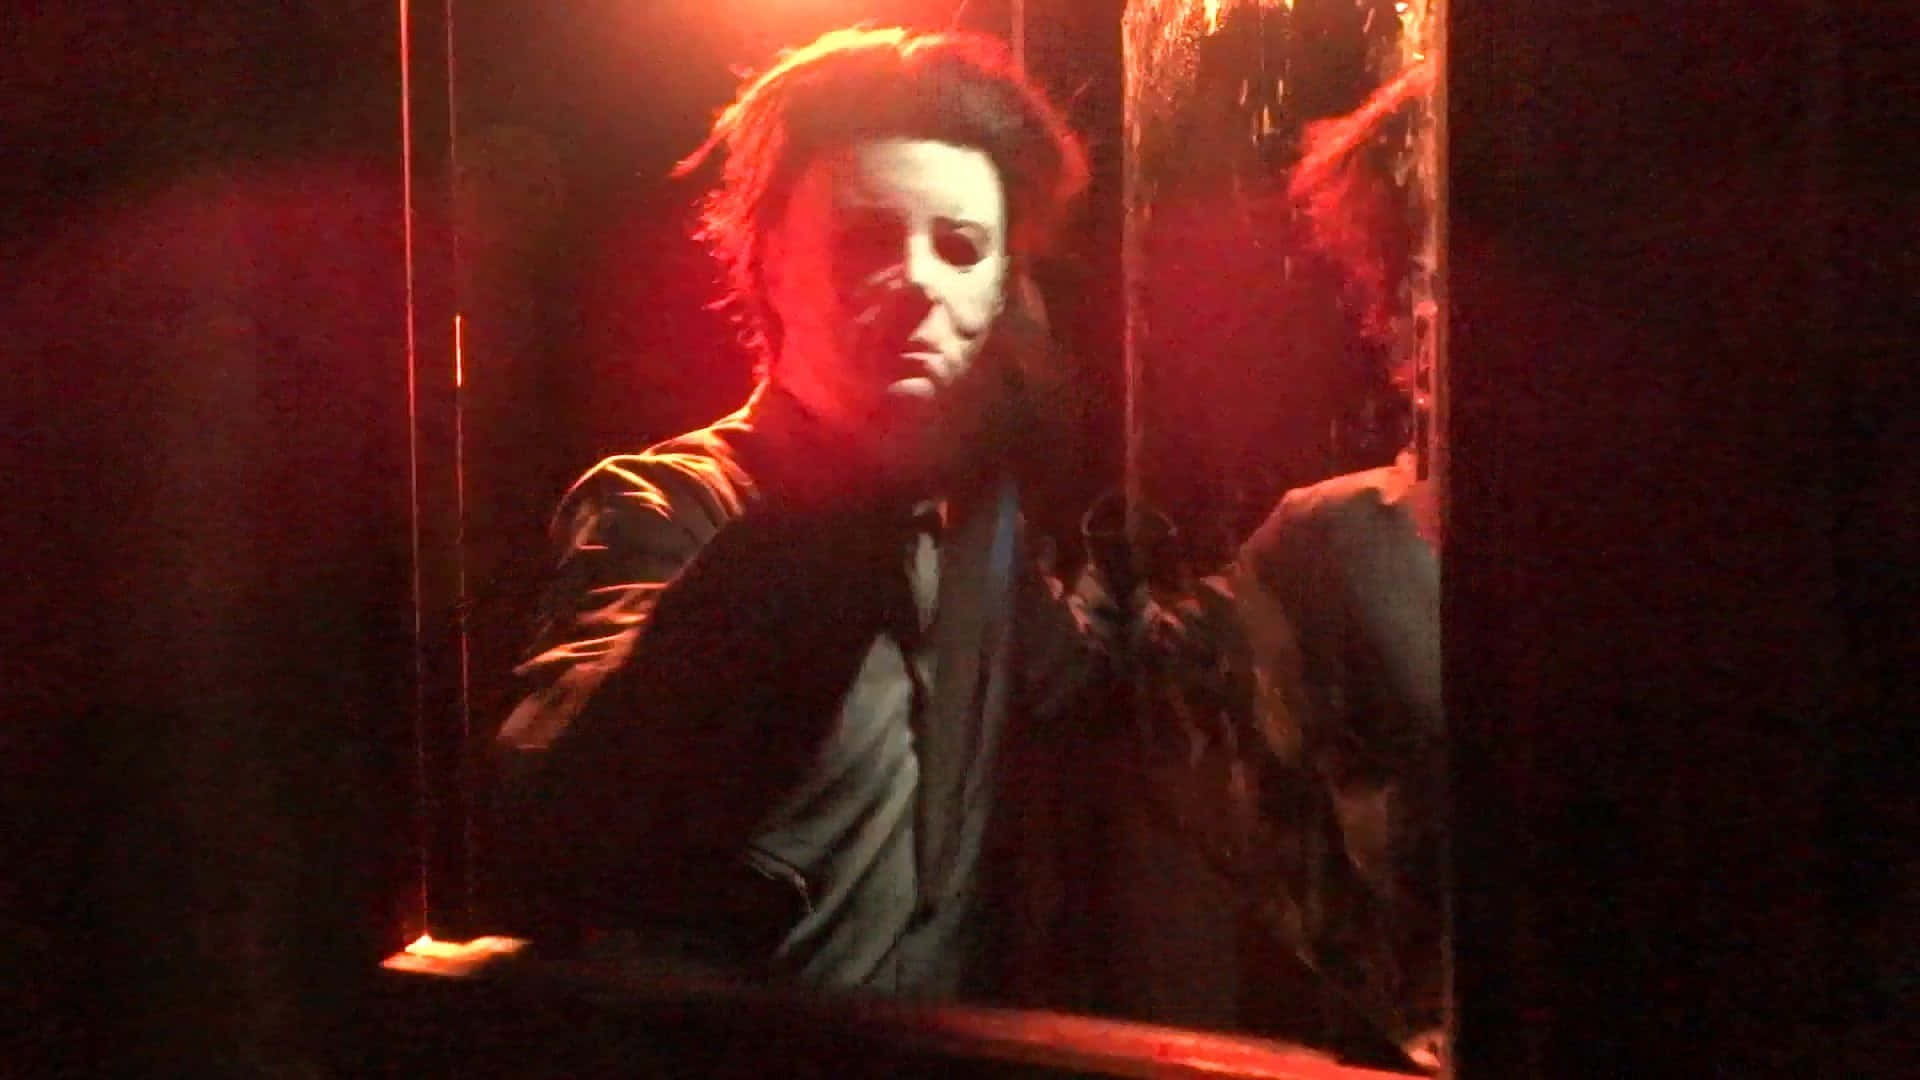 Michael Myers lurking in the shadows